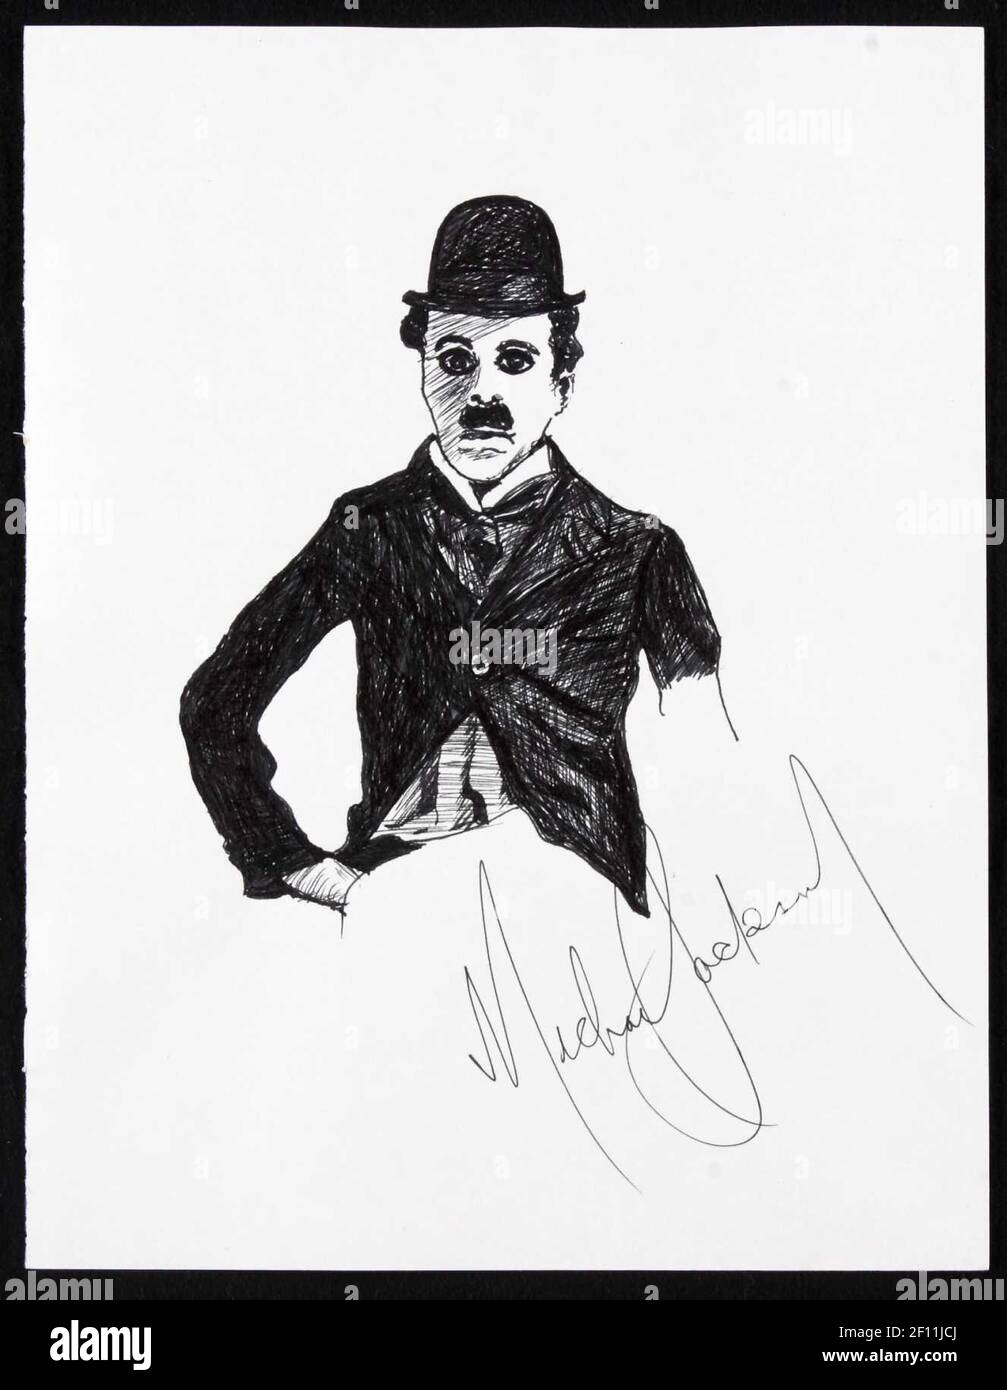 November 2009 - New York, NY - Pen on paper drawing of Charlie Chaplin, titled "Chaplin" signed Michael Jackson. Accompanied by a letter of authenticity from renowned pencil artist Lee Tomkins who was personally given the drawing on August 17, 1981at the Helmsley Palace Hotel in New York City. ESTIMATE: $2,000-4,000. Photo Credit: Julien's Auctions/Sipa Press/0911132143 Stock Photo